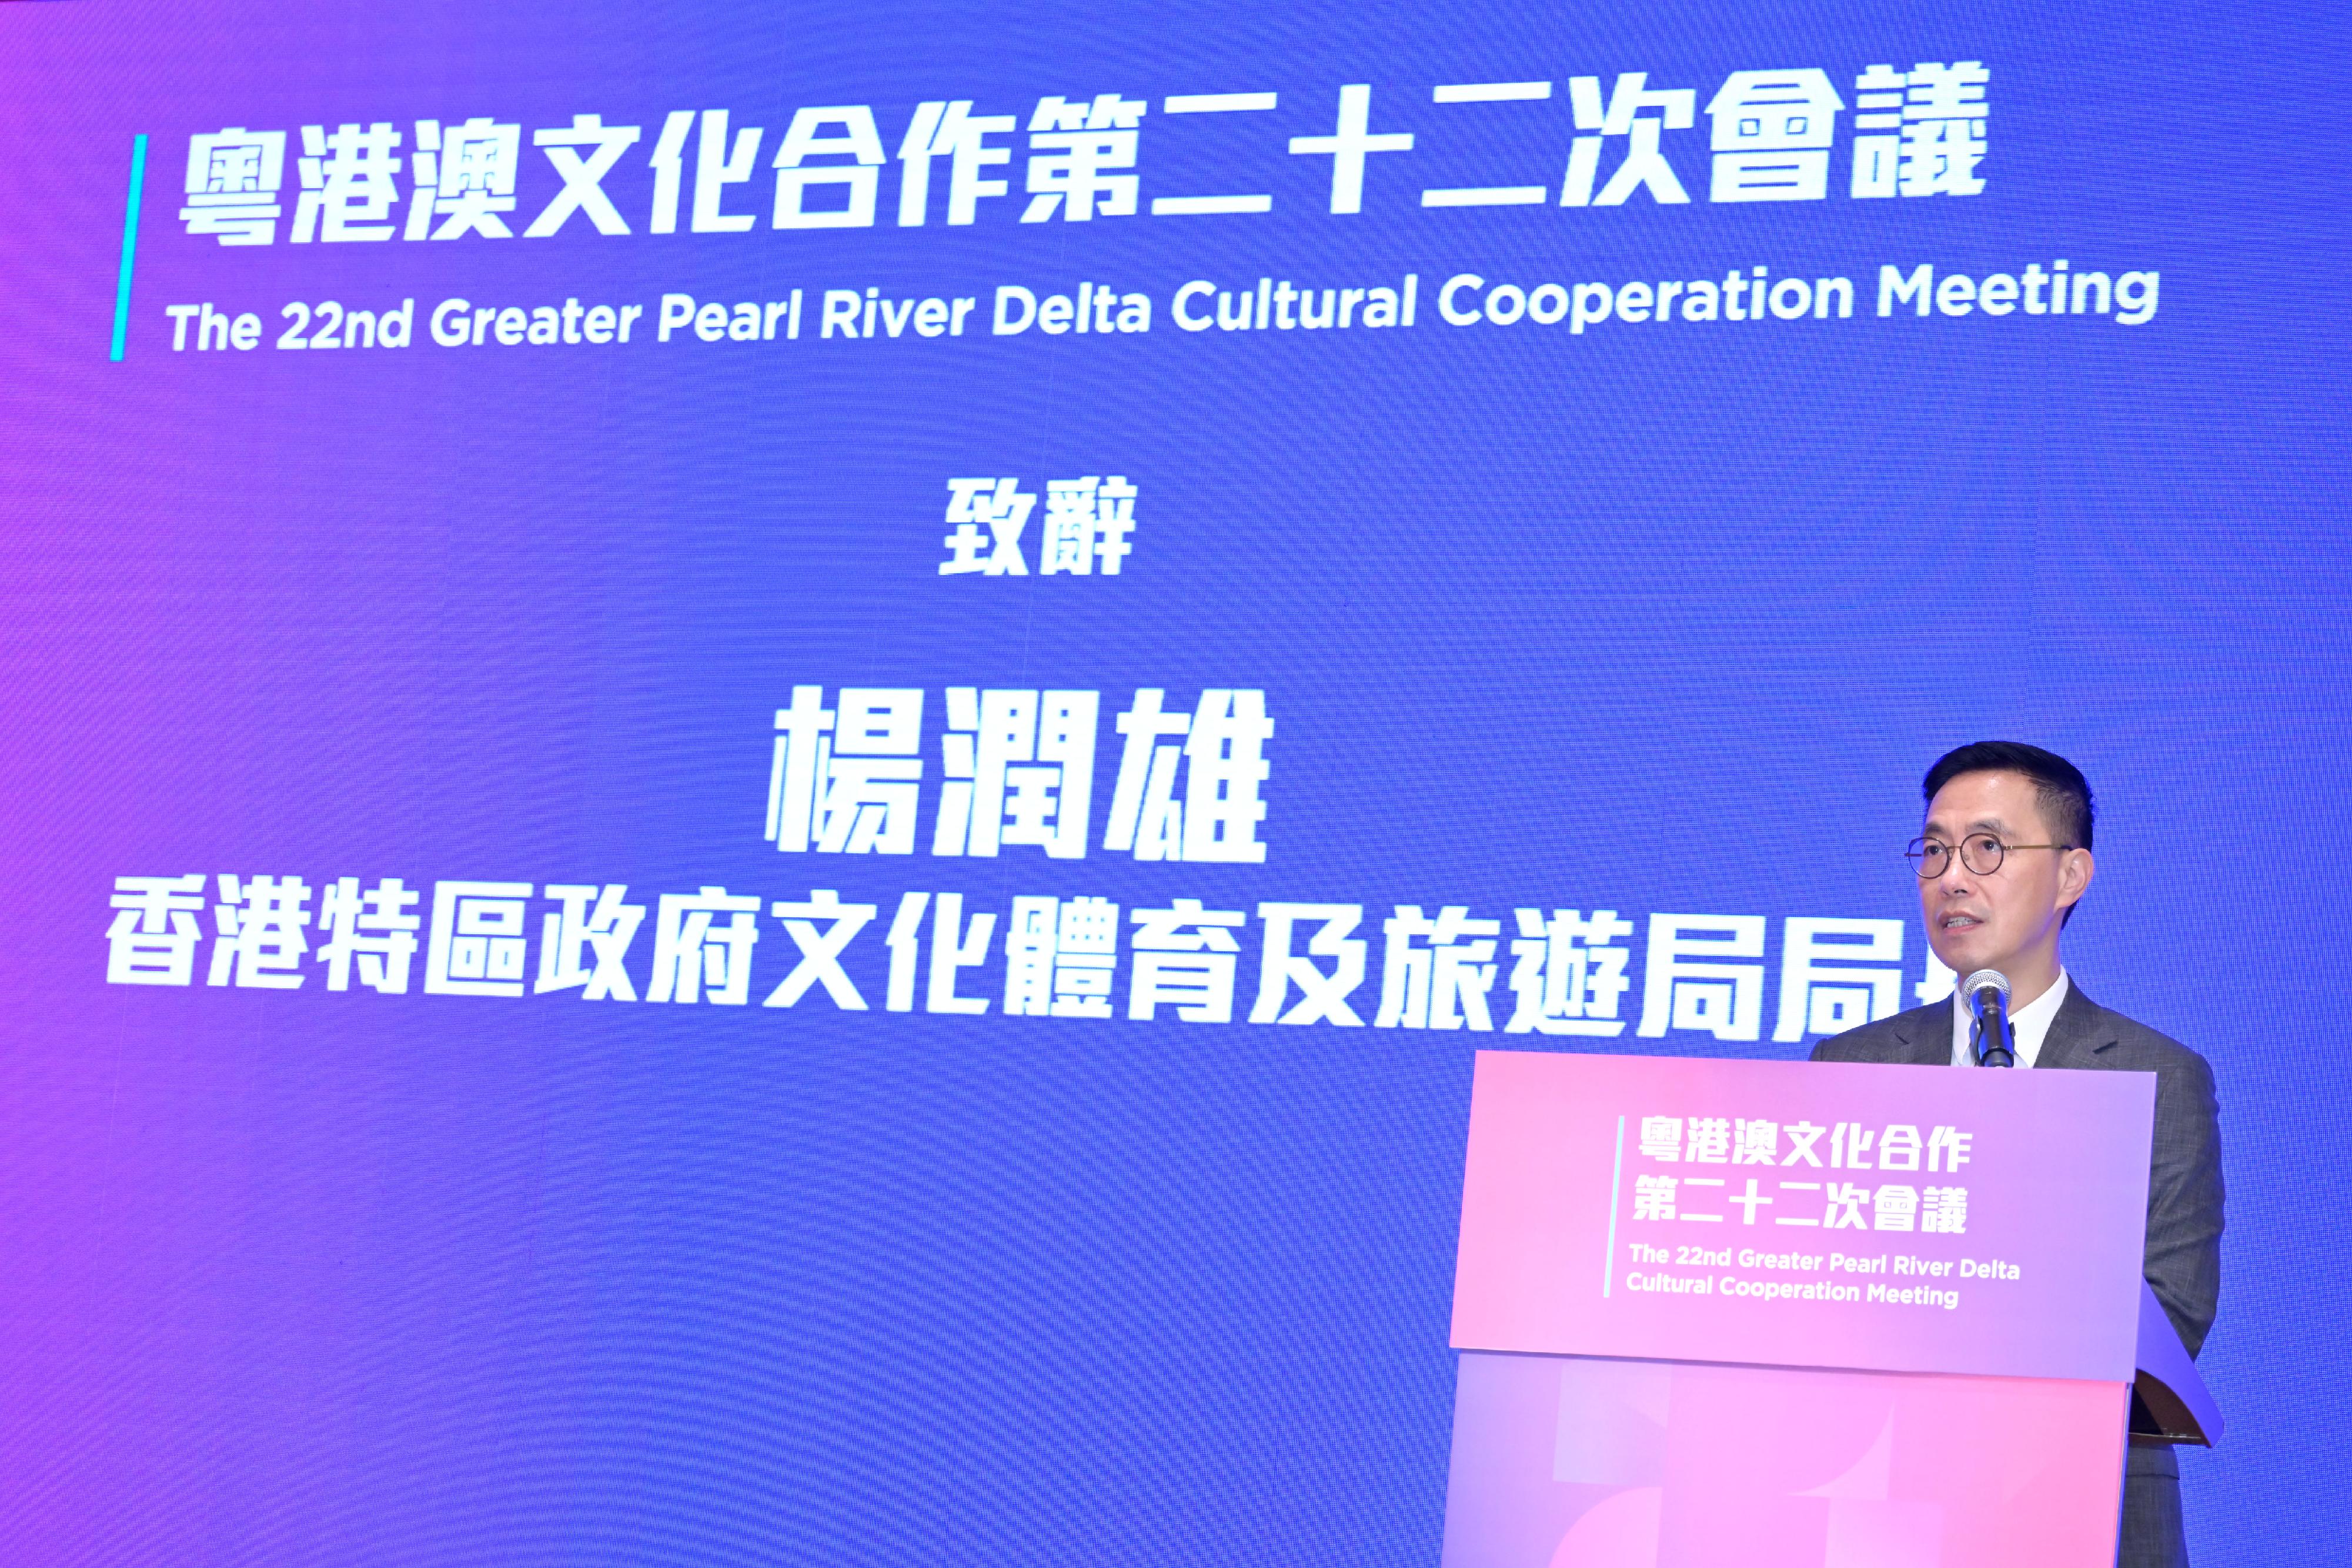 The 22nd Greater Pearl River Delta Cultural Cooperation Meeting (the Meeting), co-ordinated by the Culture, Sports and Tourism Bureau, was concluded in Hong Kong today (June 6). Photo shows the Secretary for Culture, Sports and Tourism, Mr Kevin Yeung, giving his concluding remarks at the Meeting today.